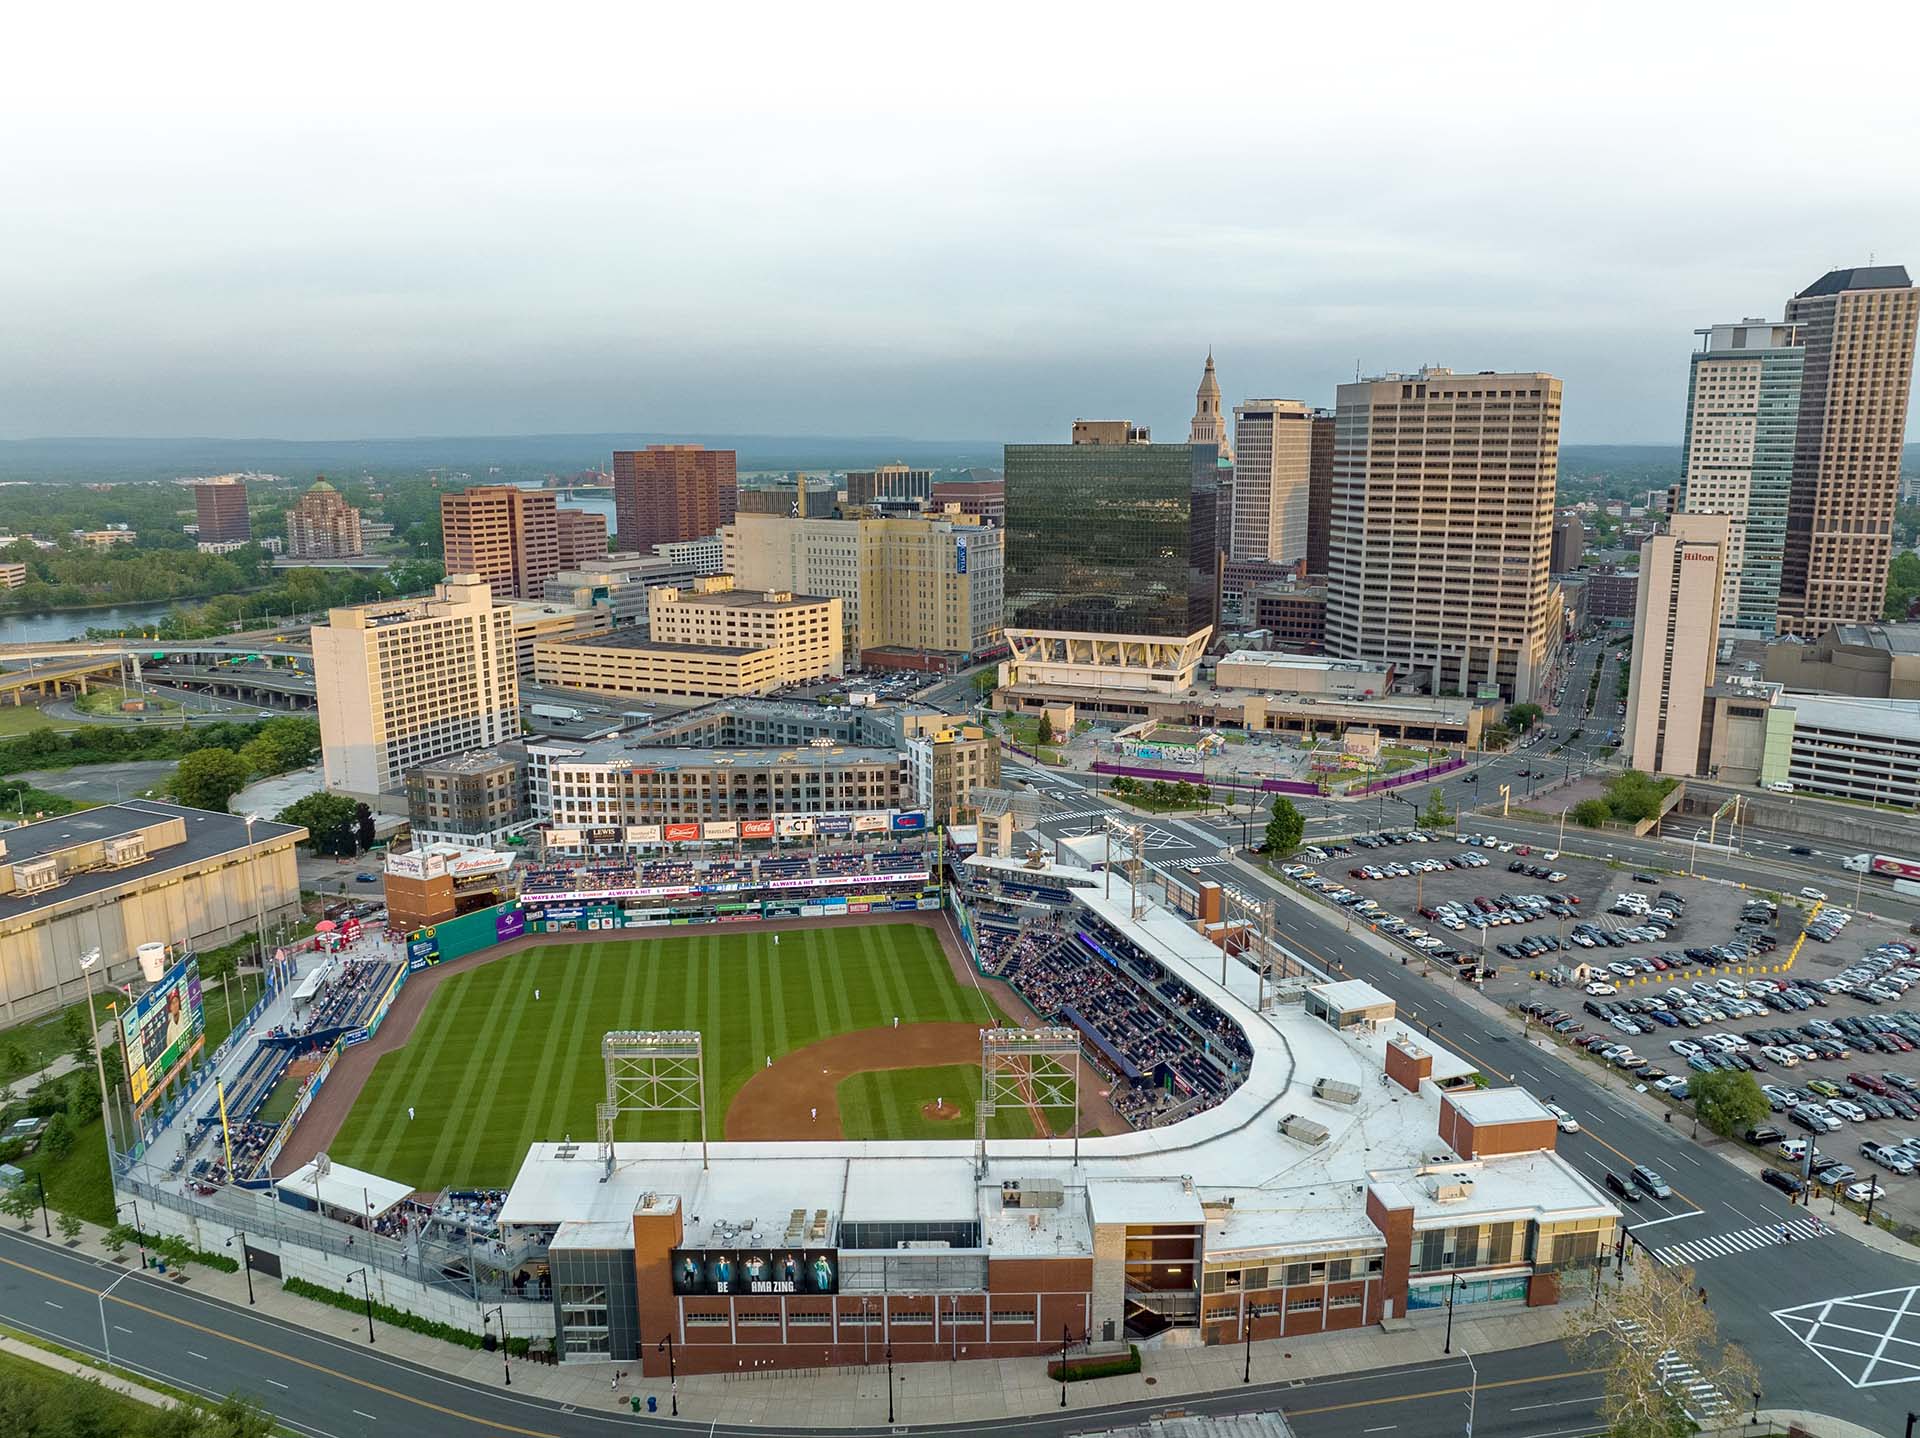 College baseball is coming back to Dunkin' Park in Hartford